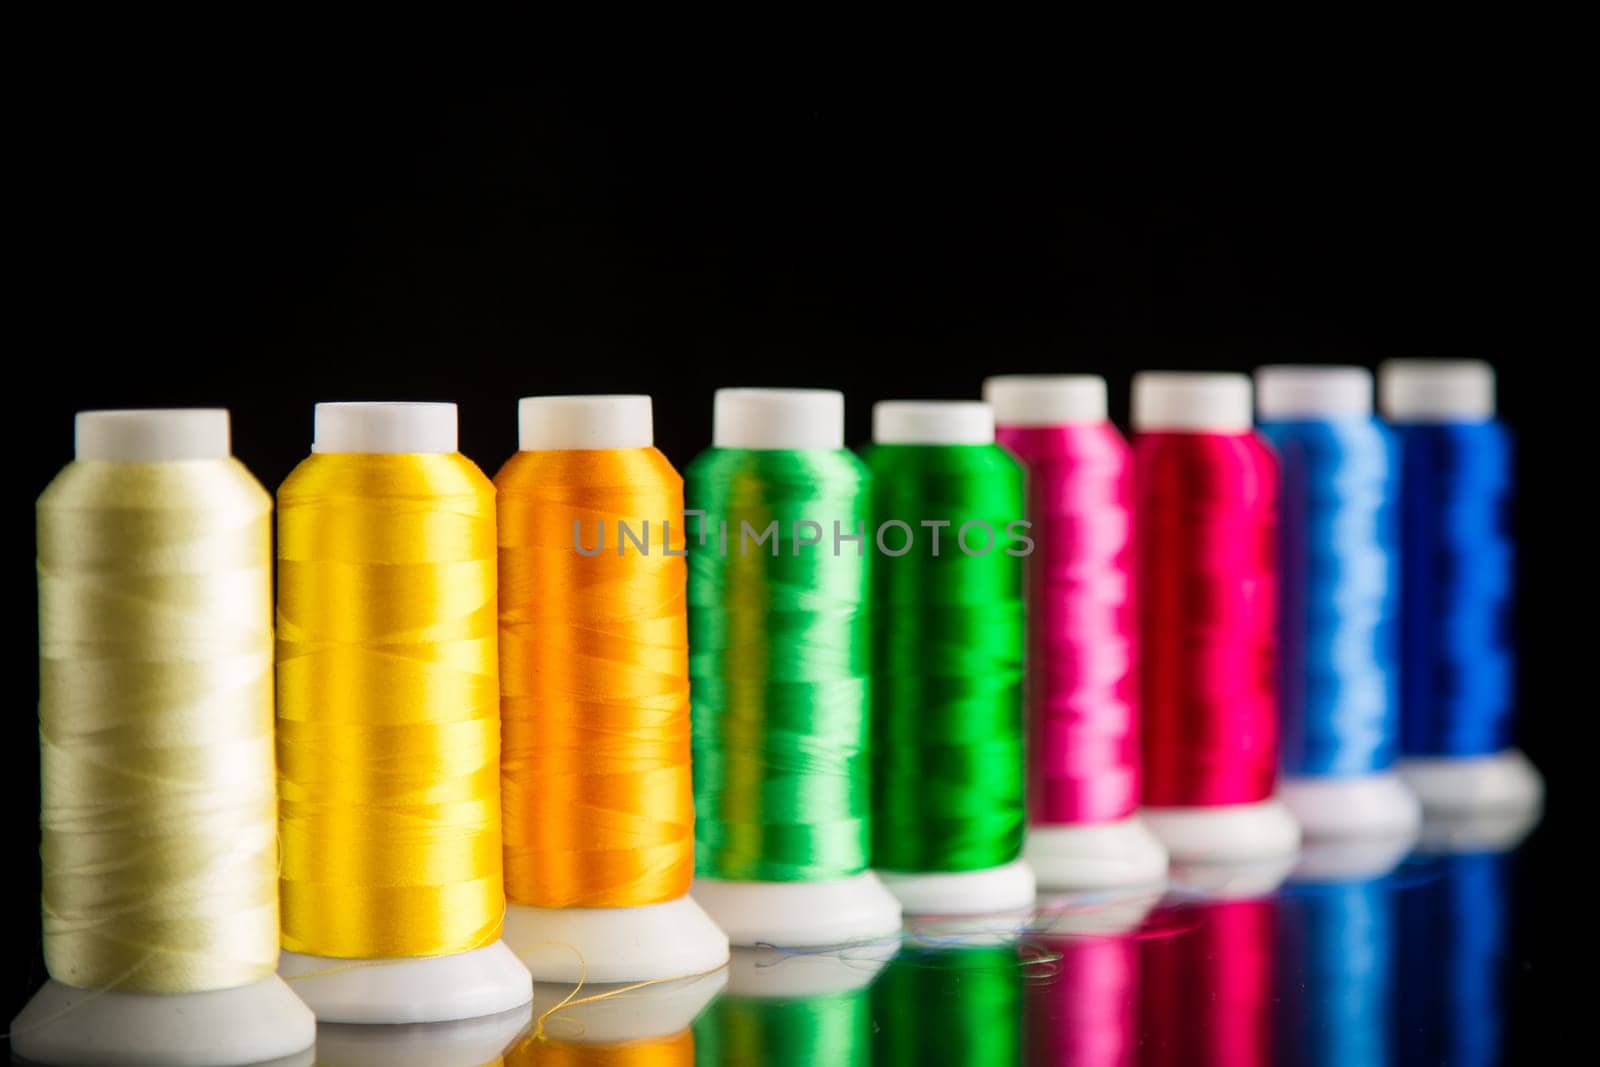 set of different color sewing threads, isolated on black background.